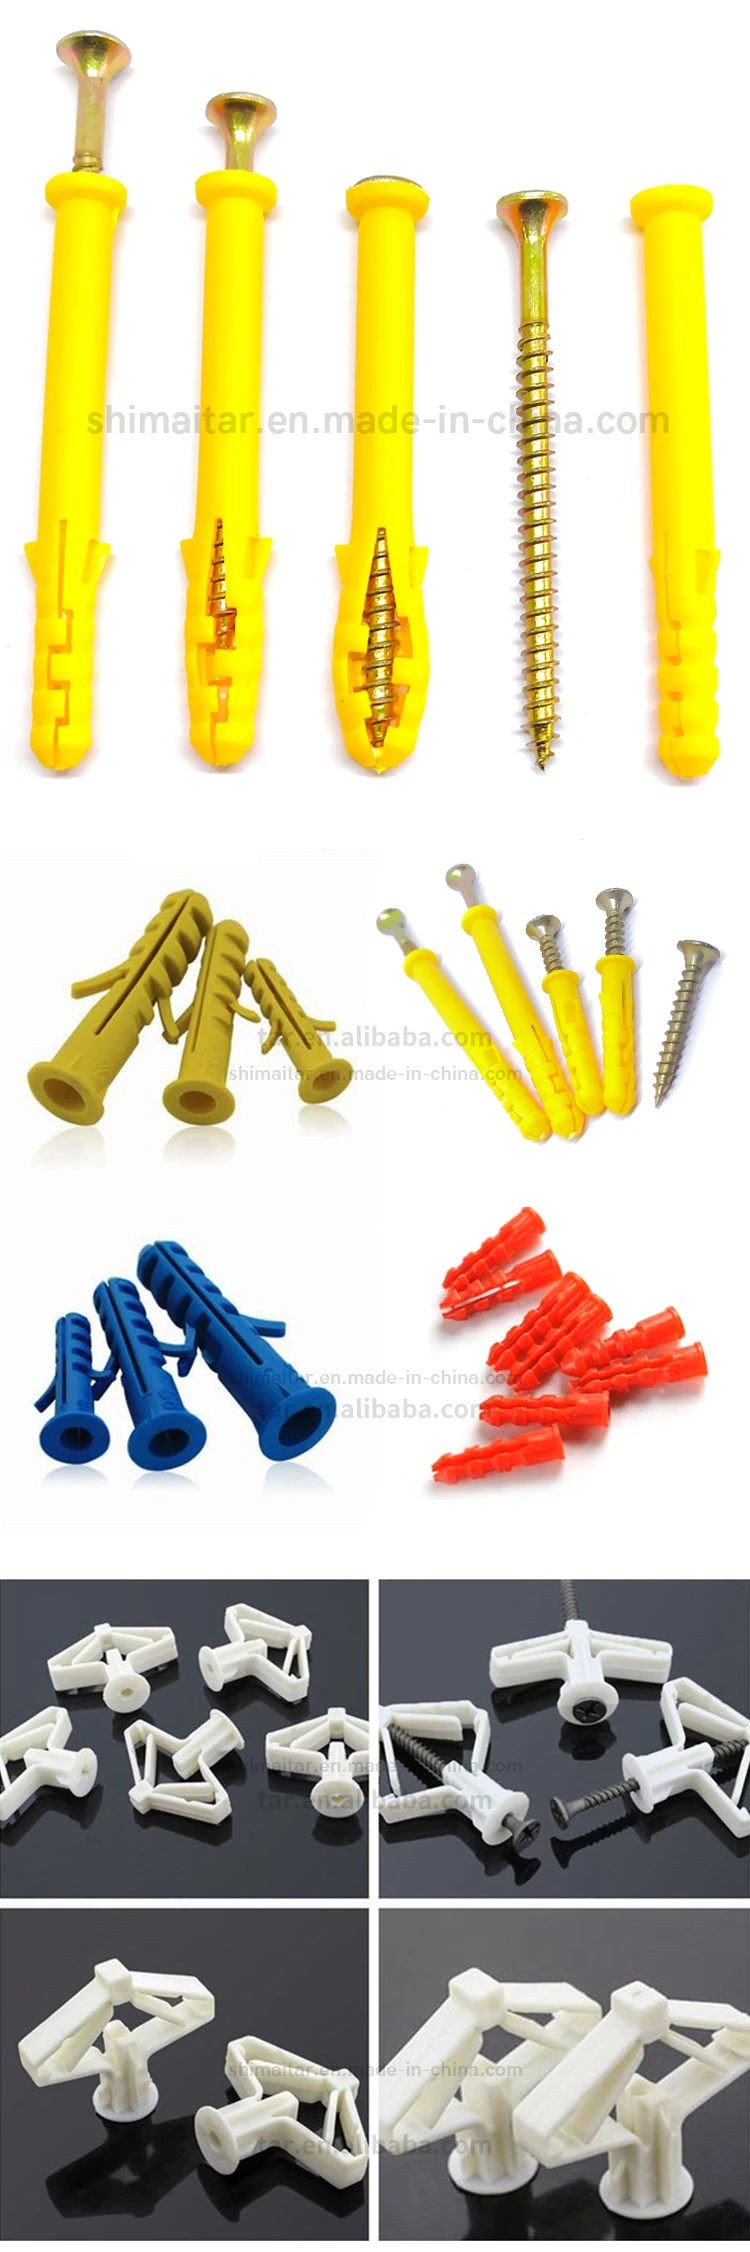 Concrete Nylon Easy Drive Drywall Expansion Plastic Anchor Screw Rame Fixing Wall Anchor Sleeve Screws